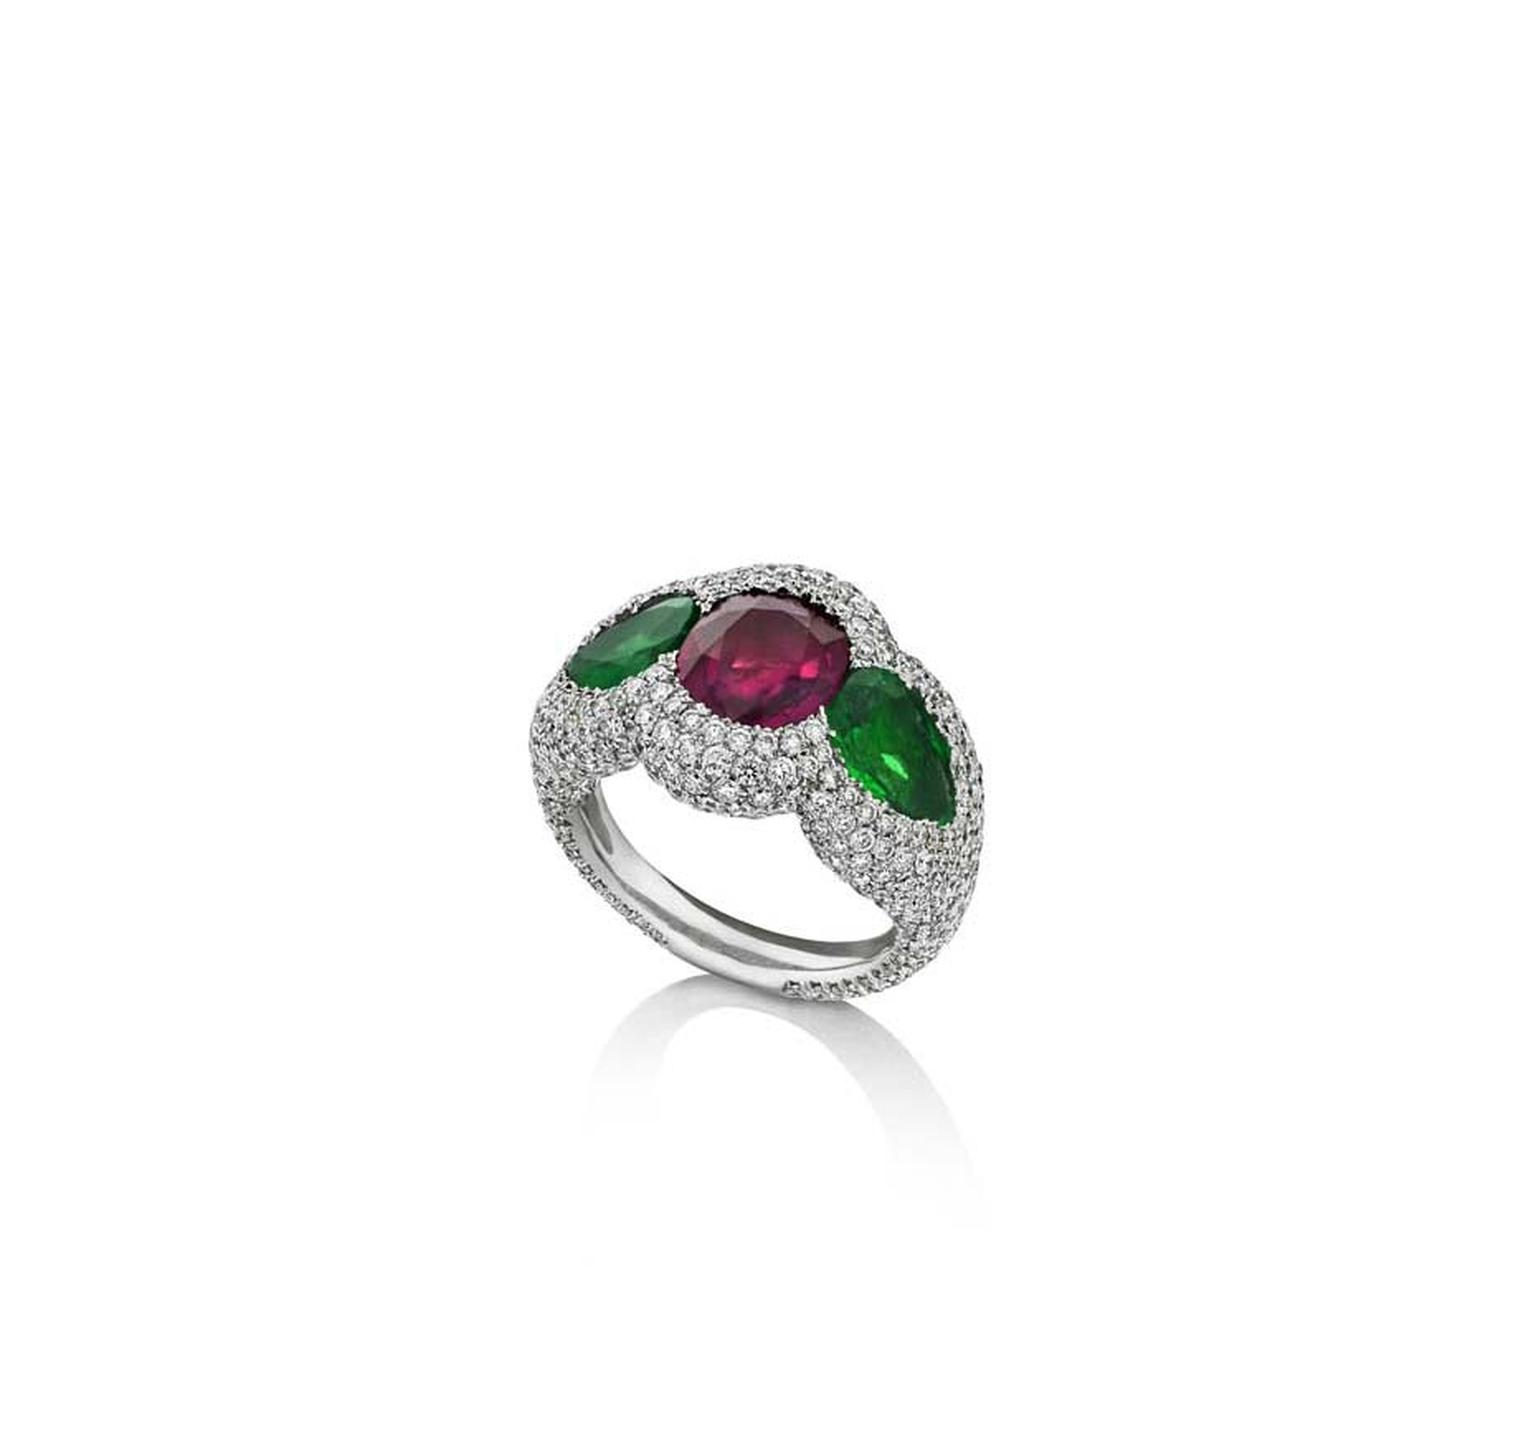 One-of-a-kind Niquesa Rose of the Desert ring set with a central Gemfields African ruby and Gemfields emeralds, encased in diamonds.